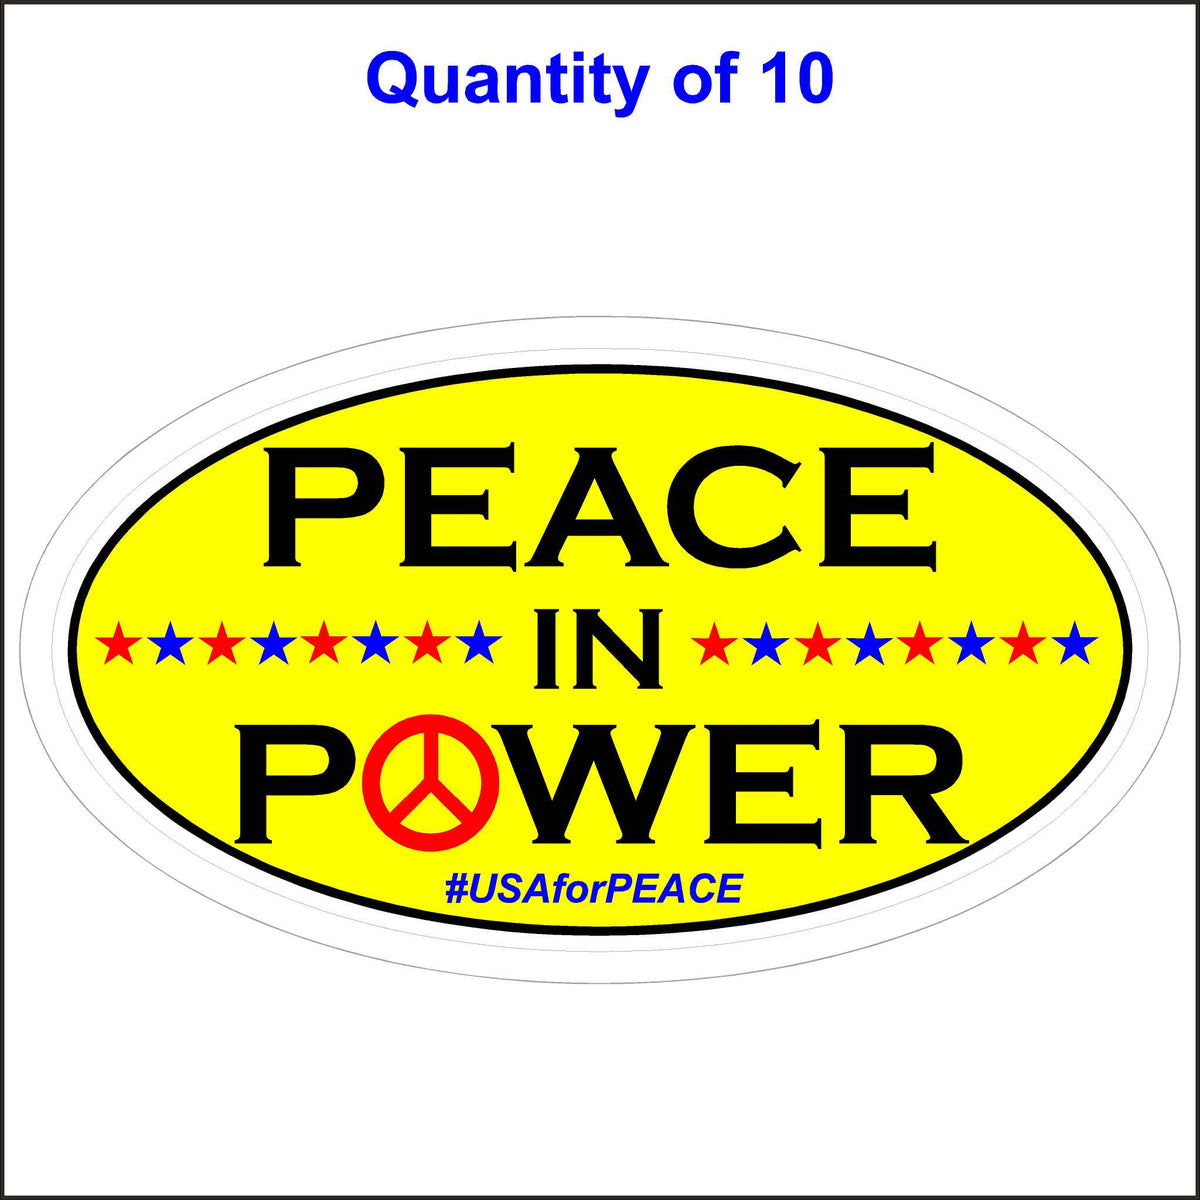 Peace in Power - Peace Sticker, USA For Peace. 10 Quantity.